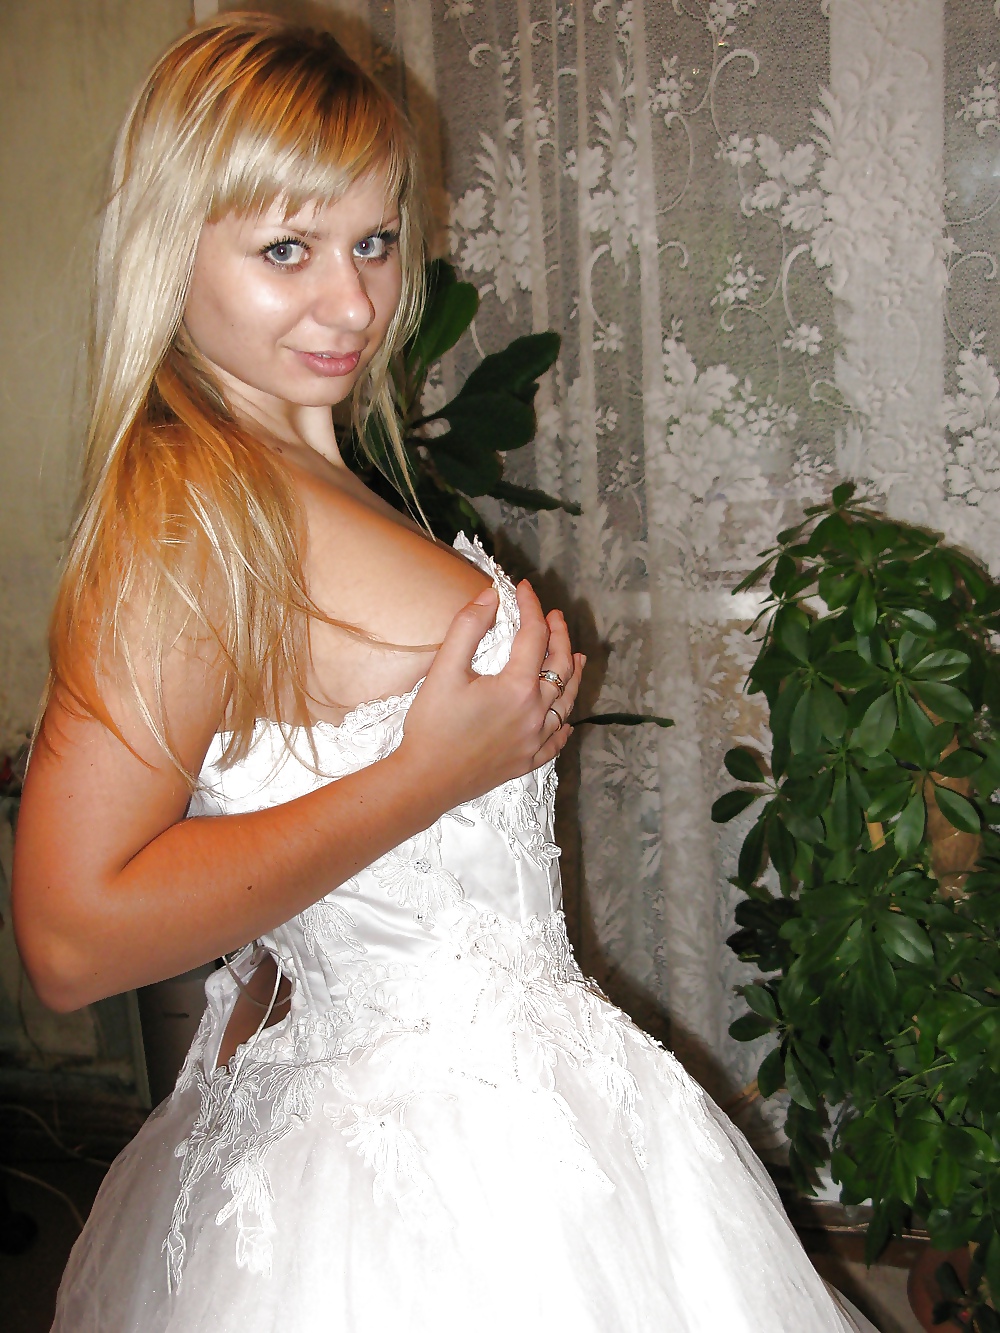 Here CUMS The Bride 02 #19475297